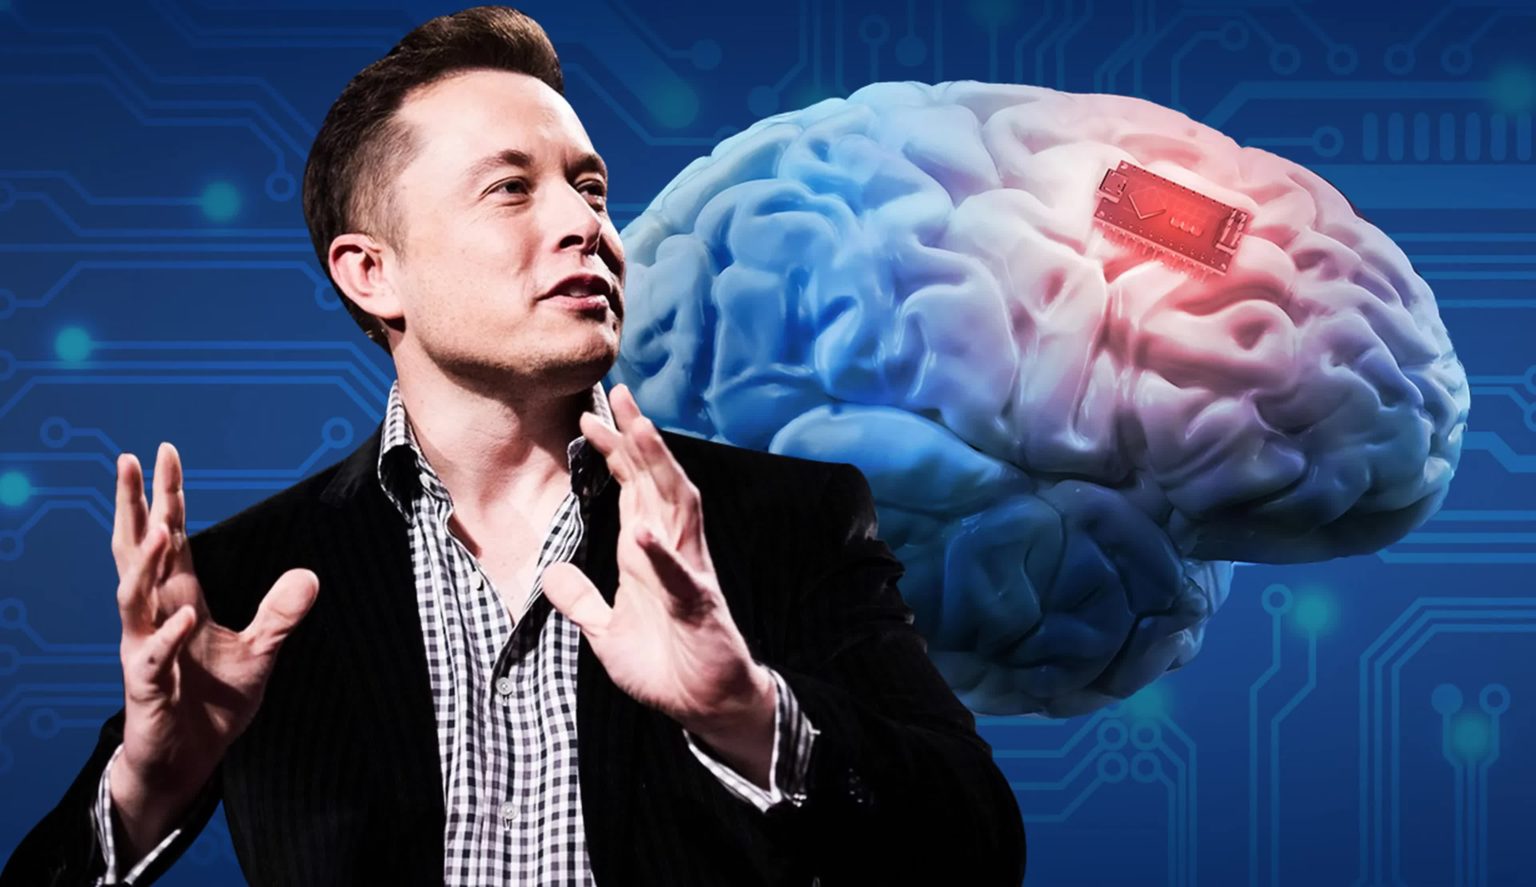 Elon Musk announces first human Neuralink implant patient, claims promising results